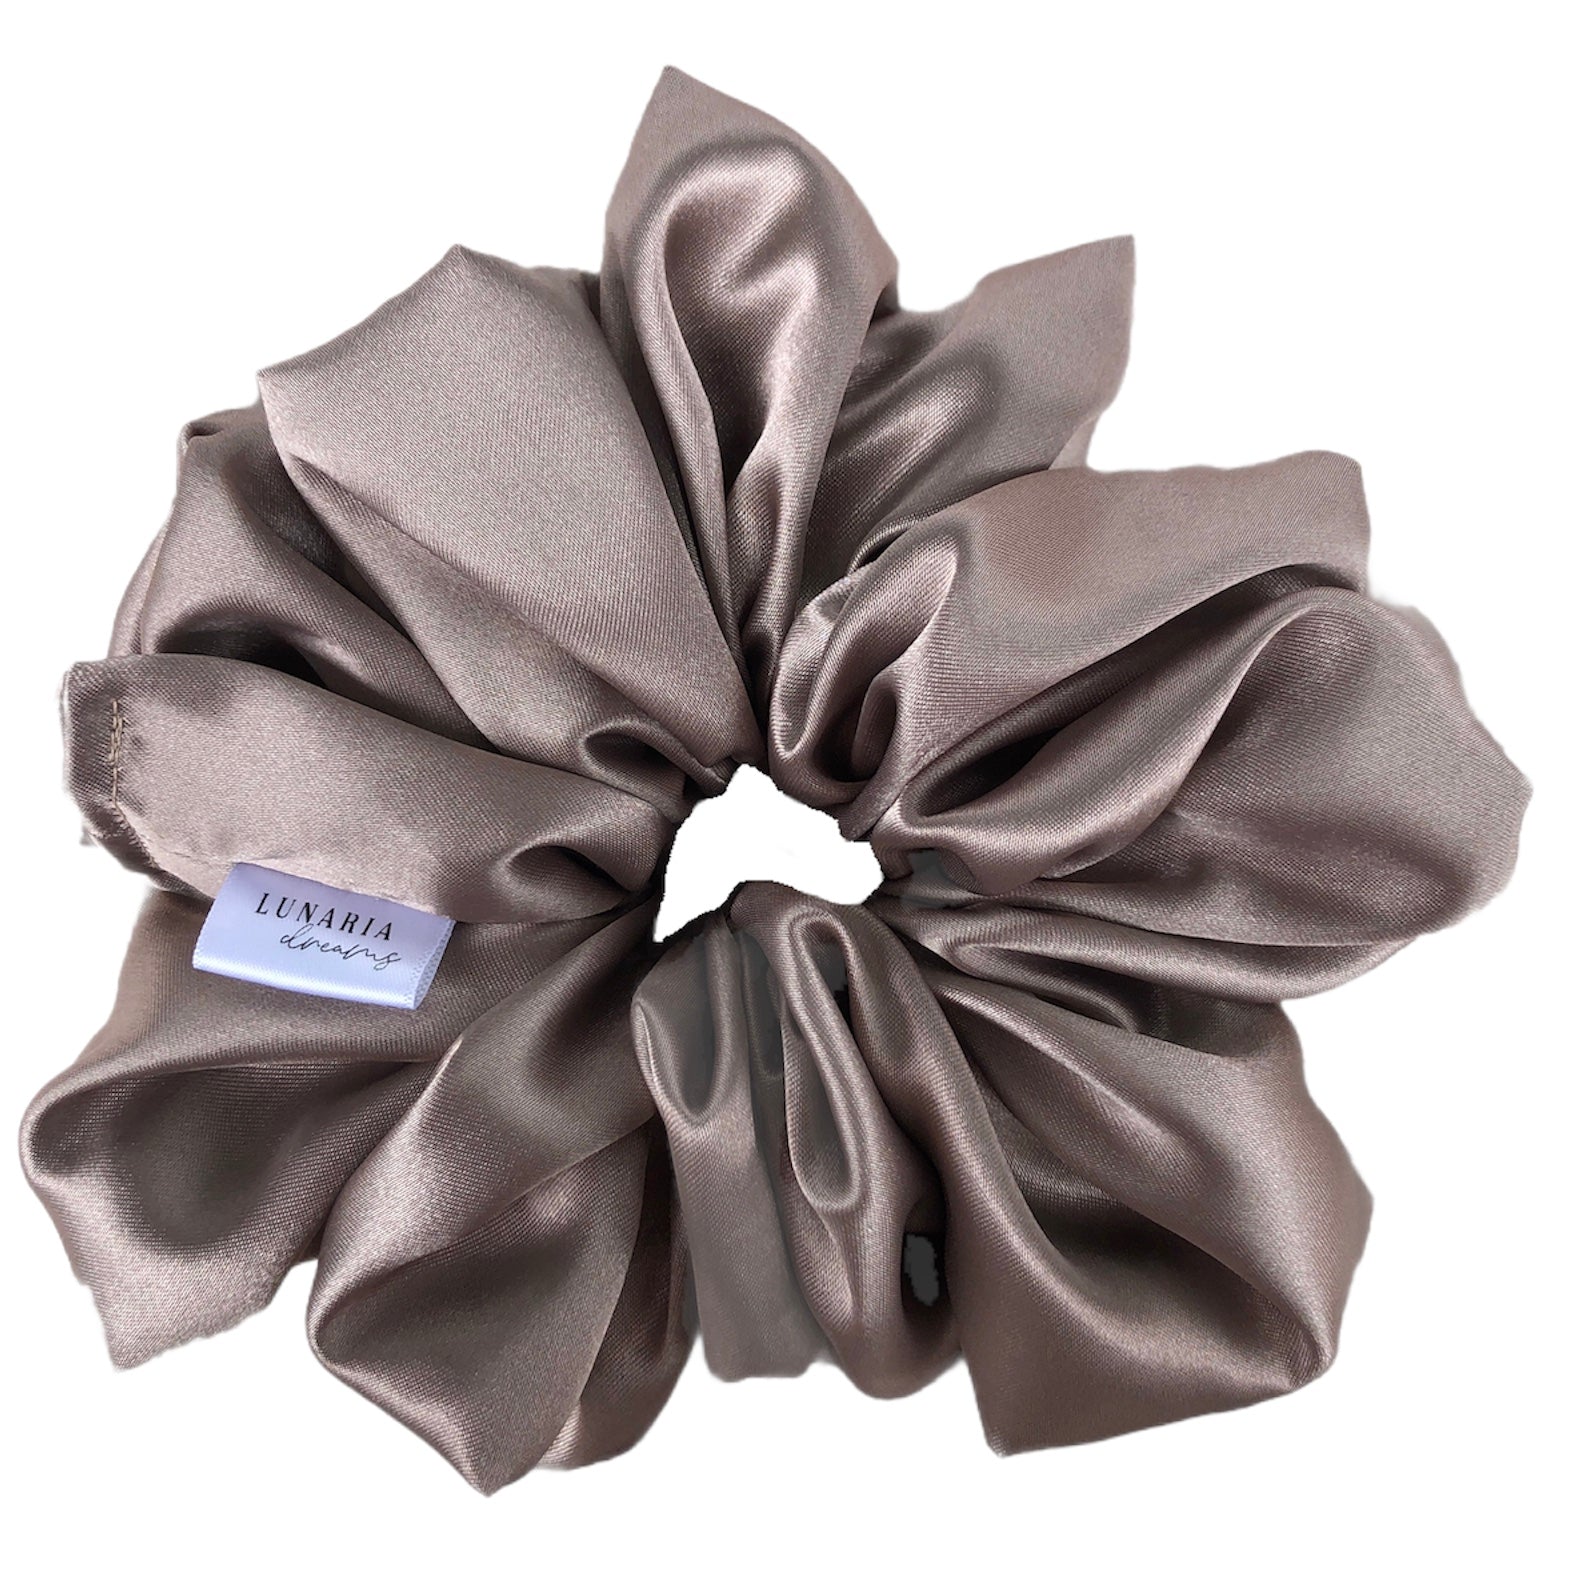 Oversized Mocha Scrunchie. An XL, extra luxe brown toned taupe satin scrunchie.